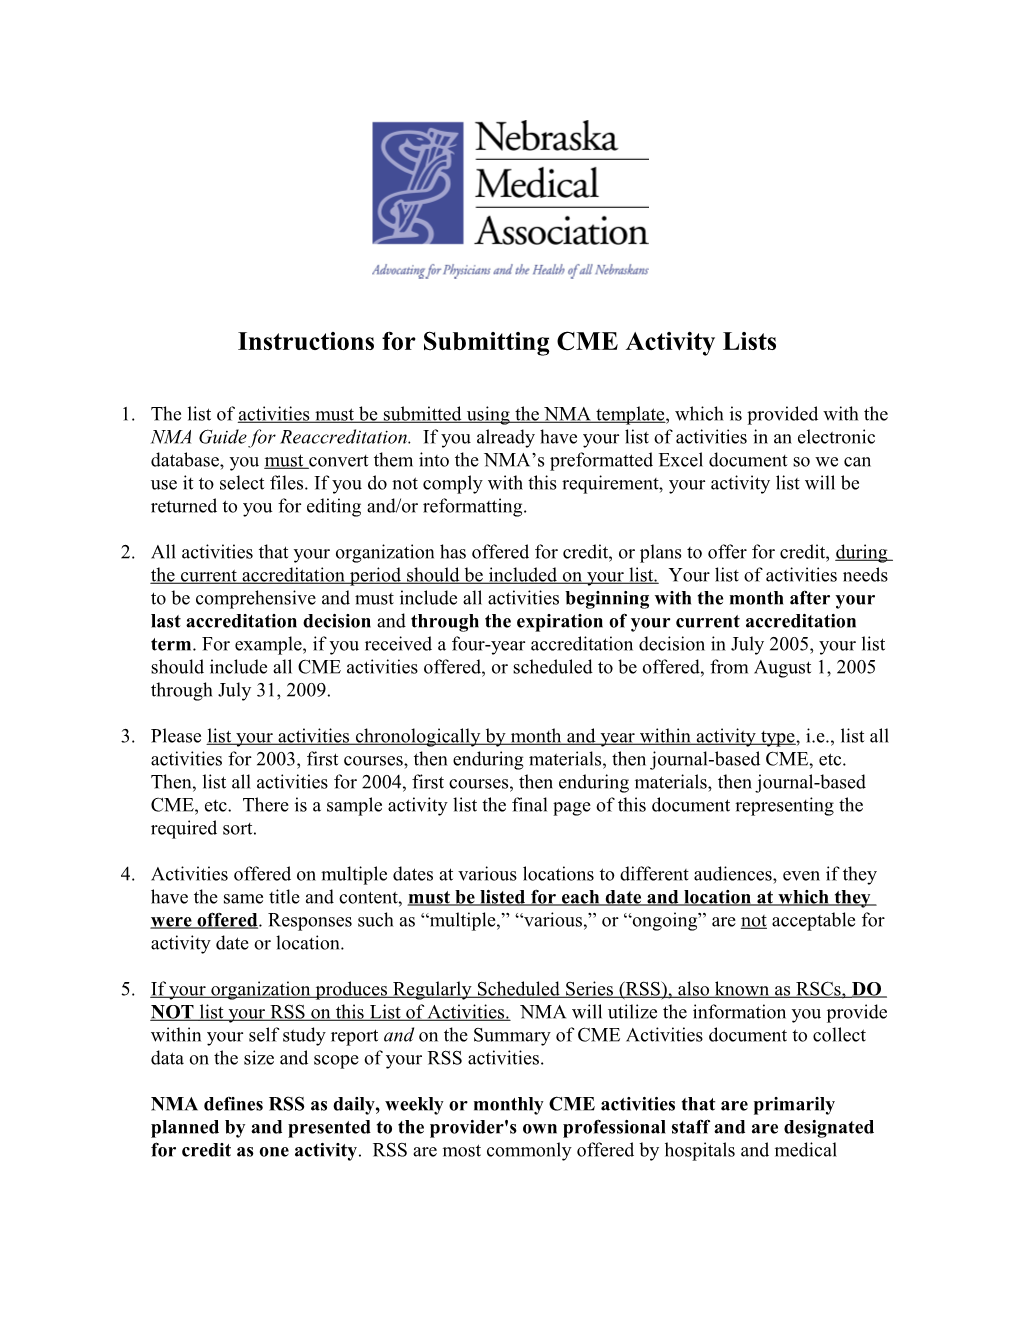 Instructions for Submitting CME Activity Lists